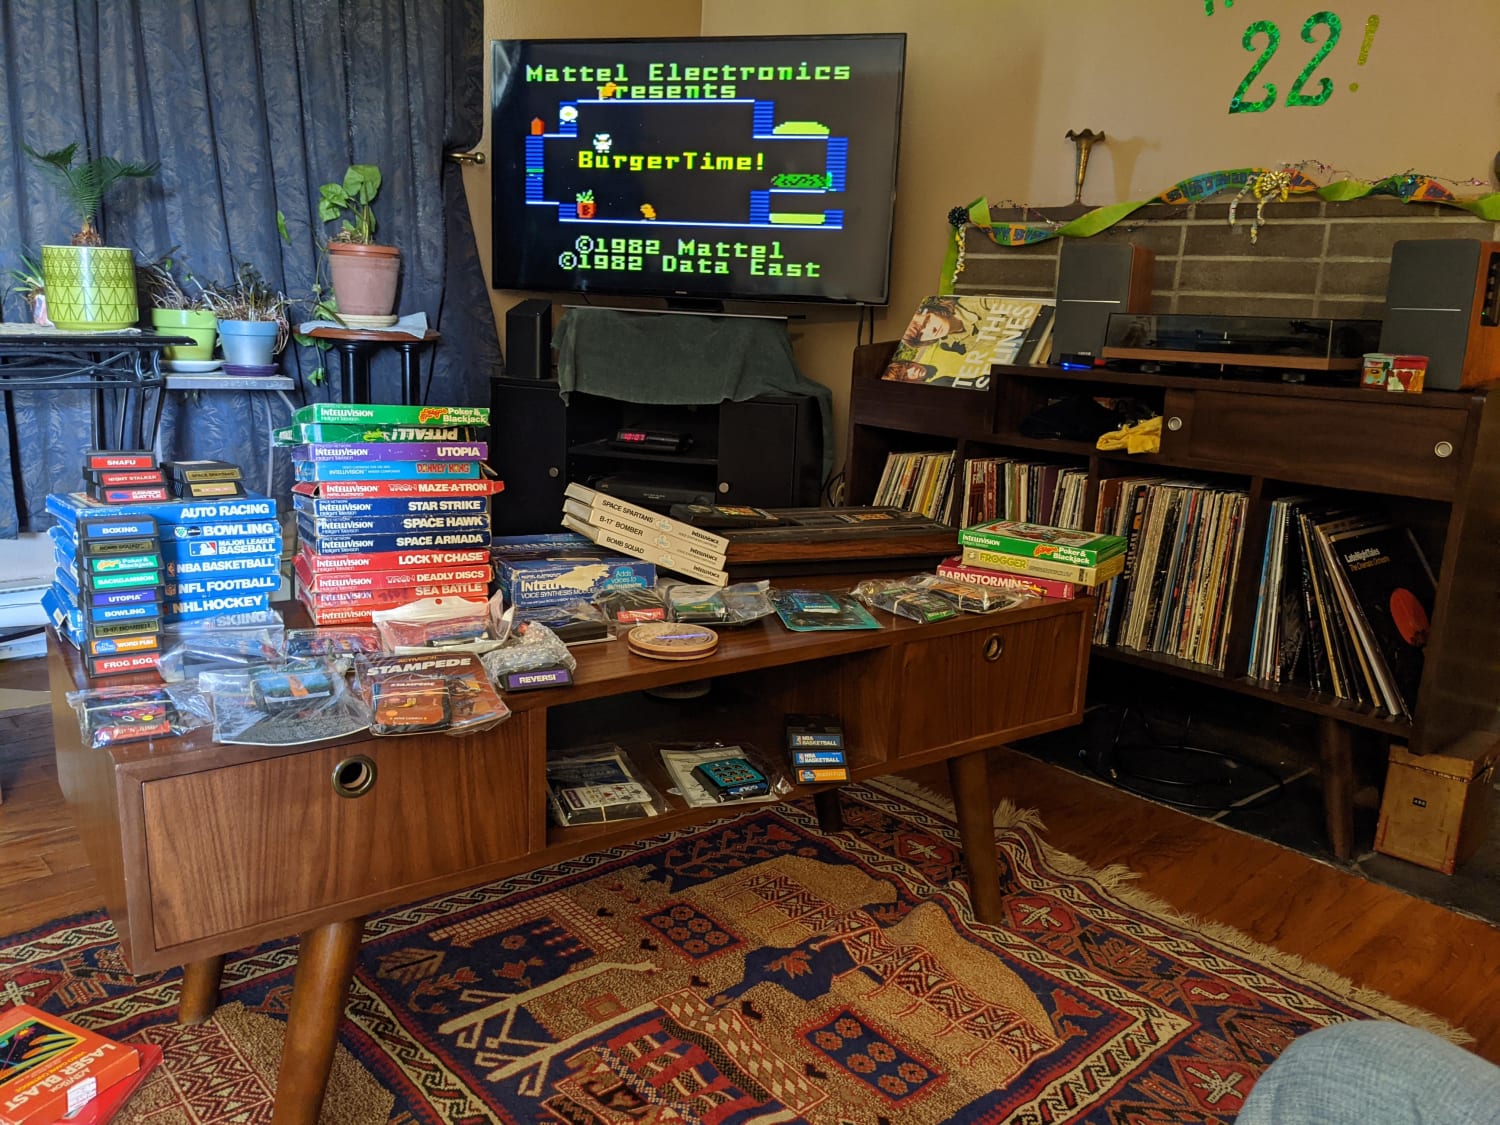 I pull out the Intellivision from time to time to enjoy my early childhood. I think the count is 50 with out duplicates. I made the coffee table and record cabinet to help create the retro vibe.